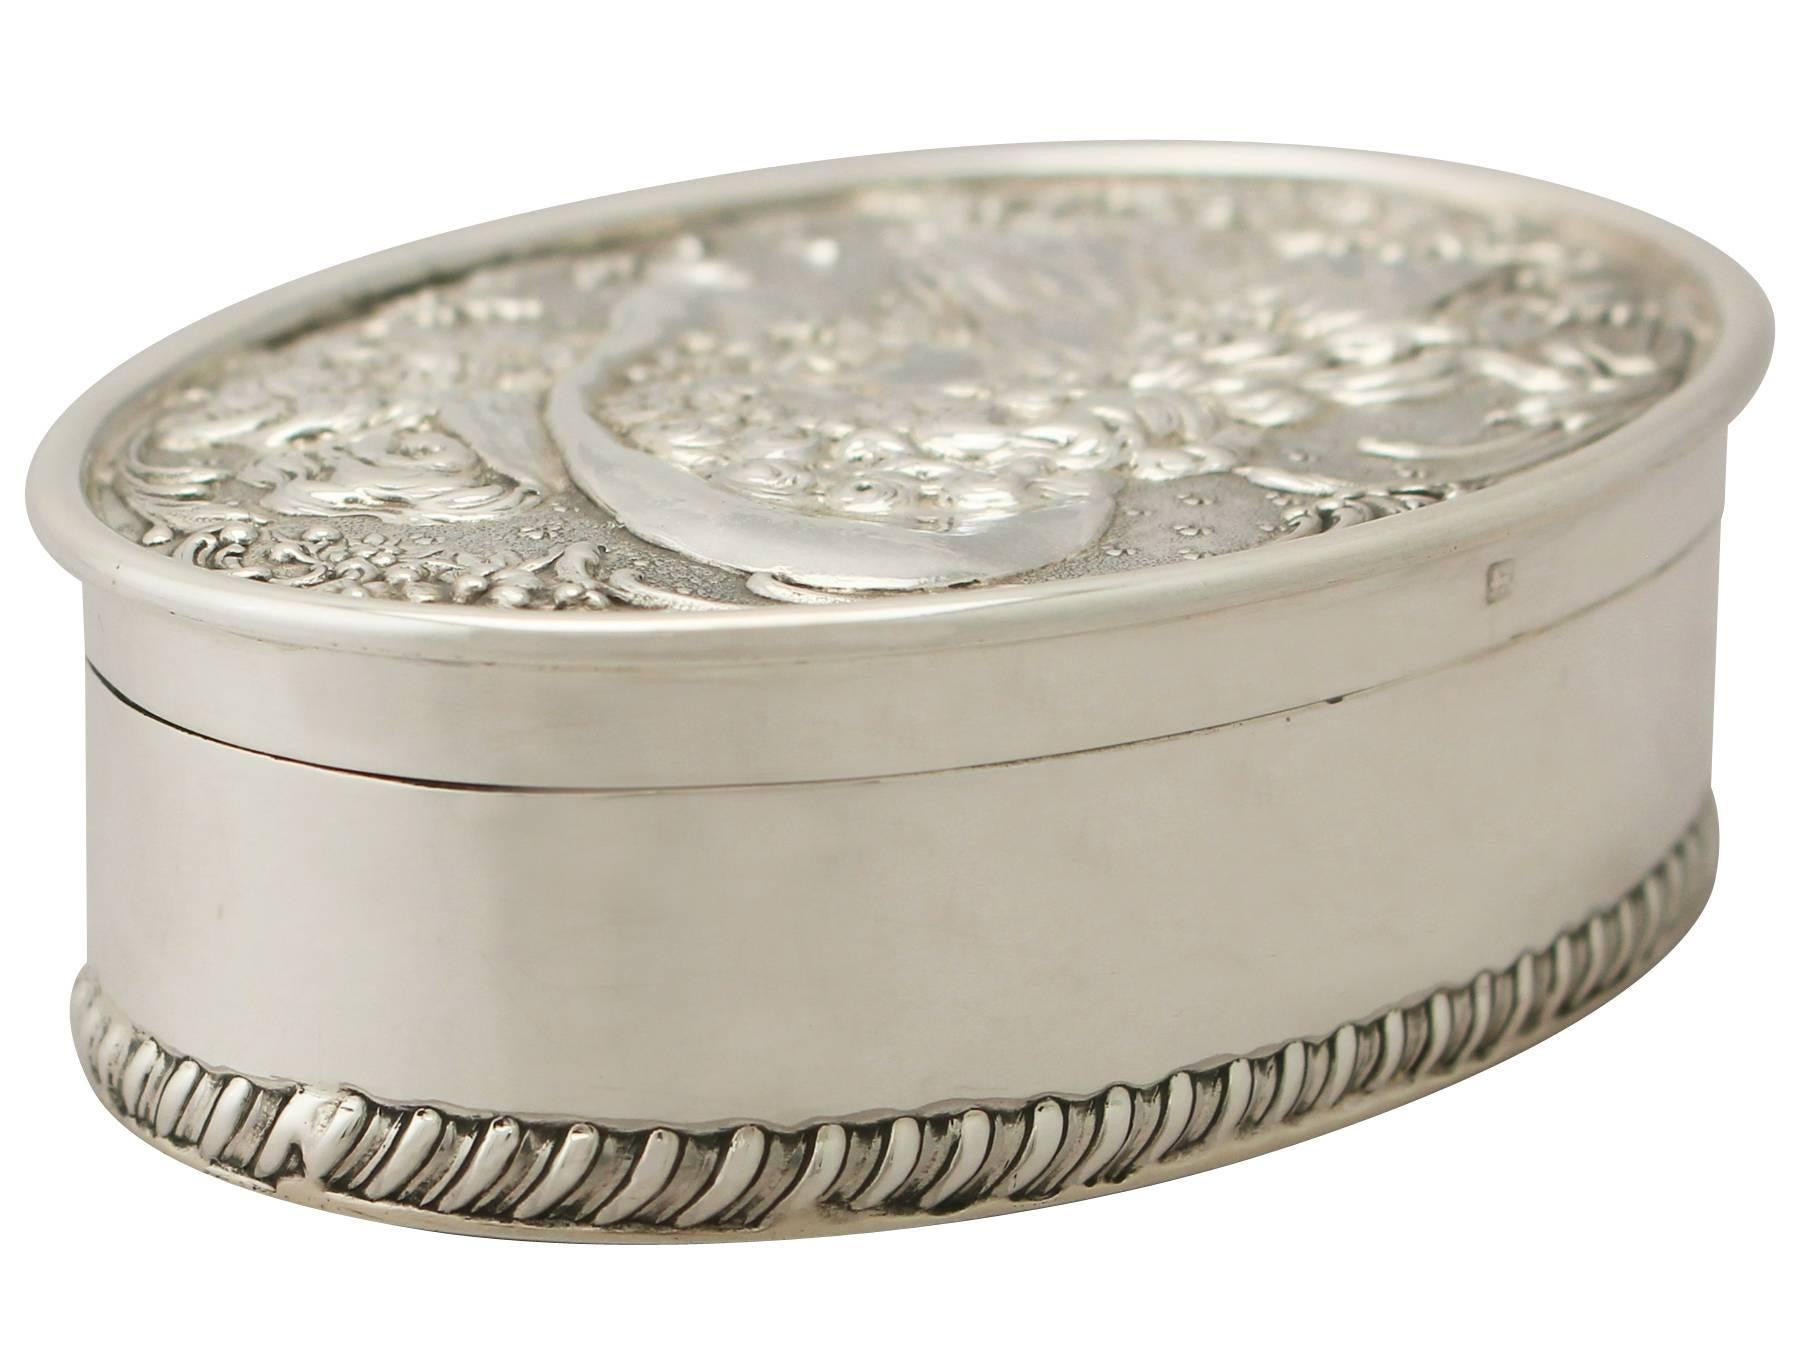 An exceptional, fine and impressive antique Edwardian English sterling silver jewelry/trinket box in the Art Nouveau style; an addition to our ornamental silverware collection.

This exceptional antique Edwardian sterling silver jewelry/trinket